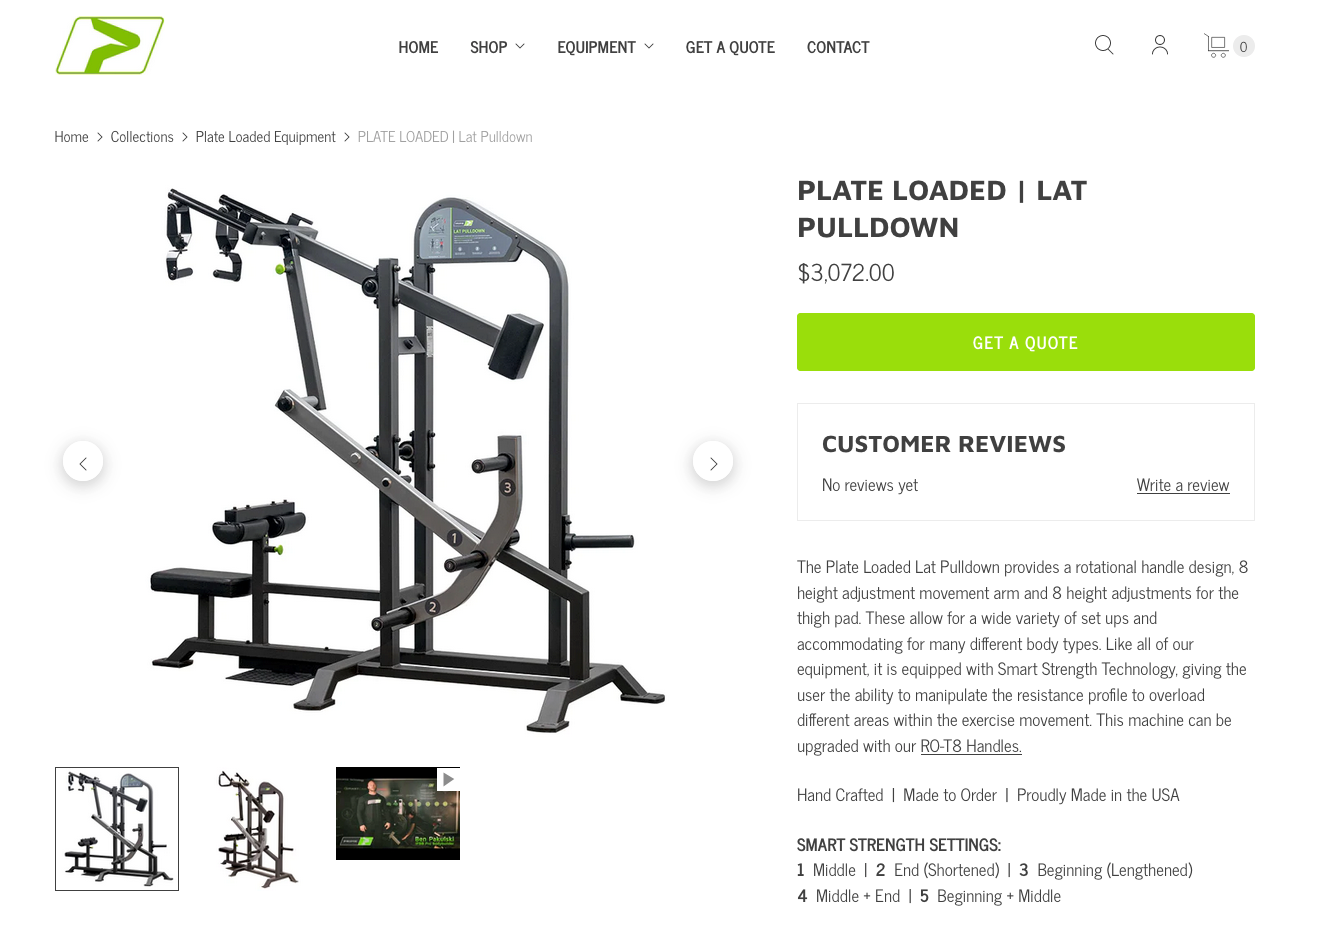 Screenshot of the Prime fitness plate loaded lat pulldown product listing on their official website, retailing at $3,072.00